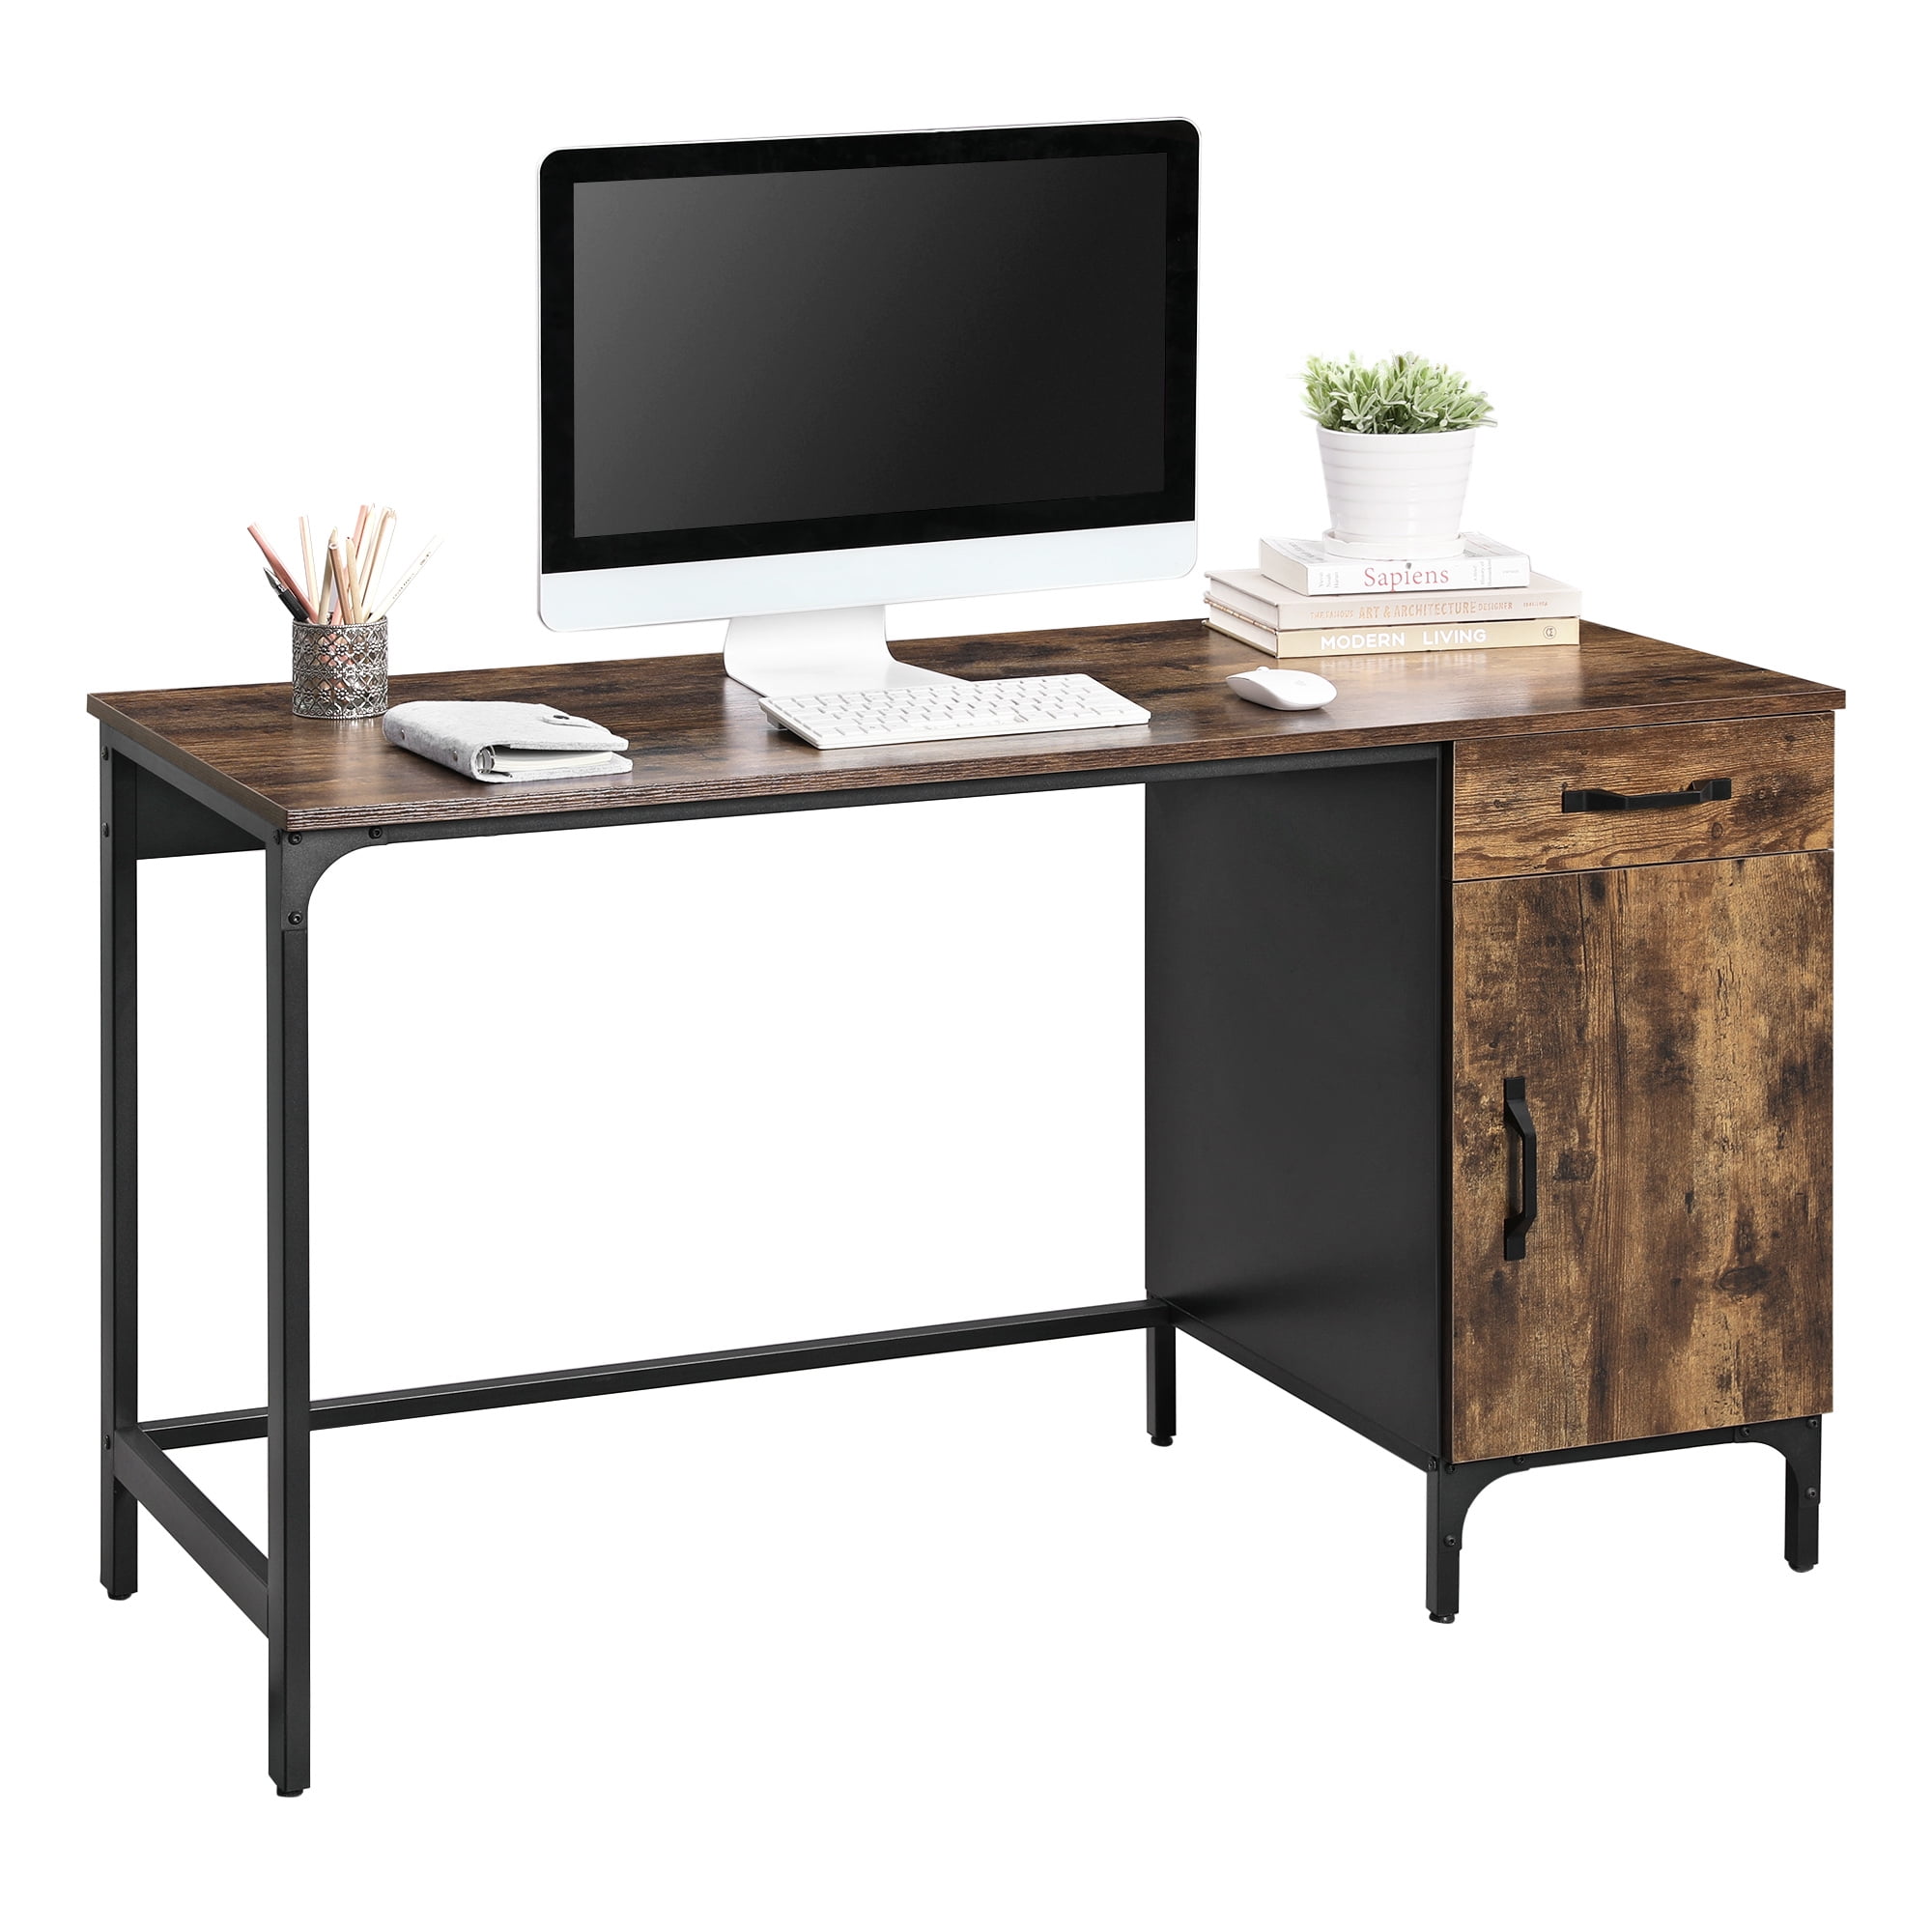 Home Office Laptop Writing Desk Table With Open Drawers Storage 110*55*75CM Size 